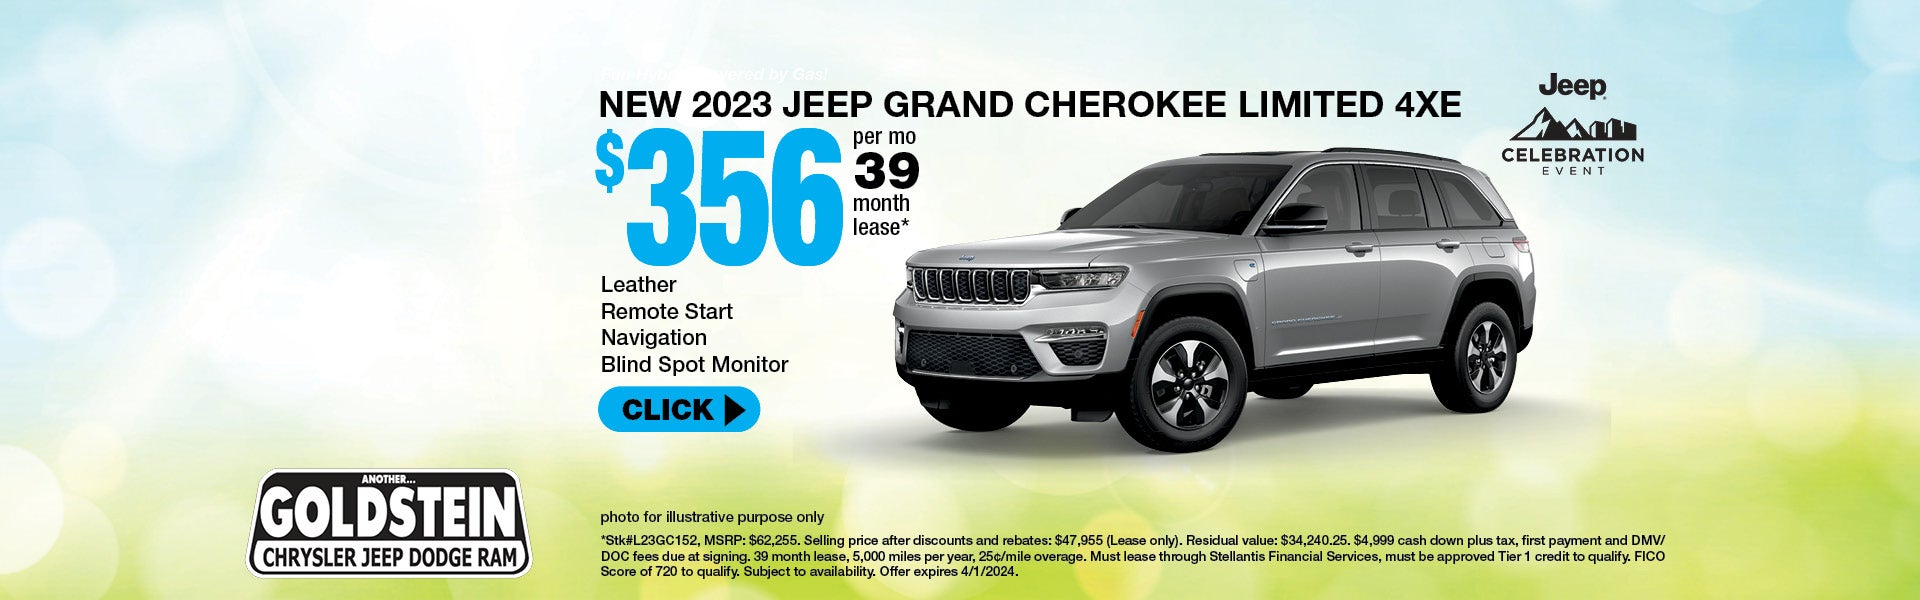 2023 Jeep Grand Cherokee Limited 